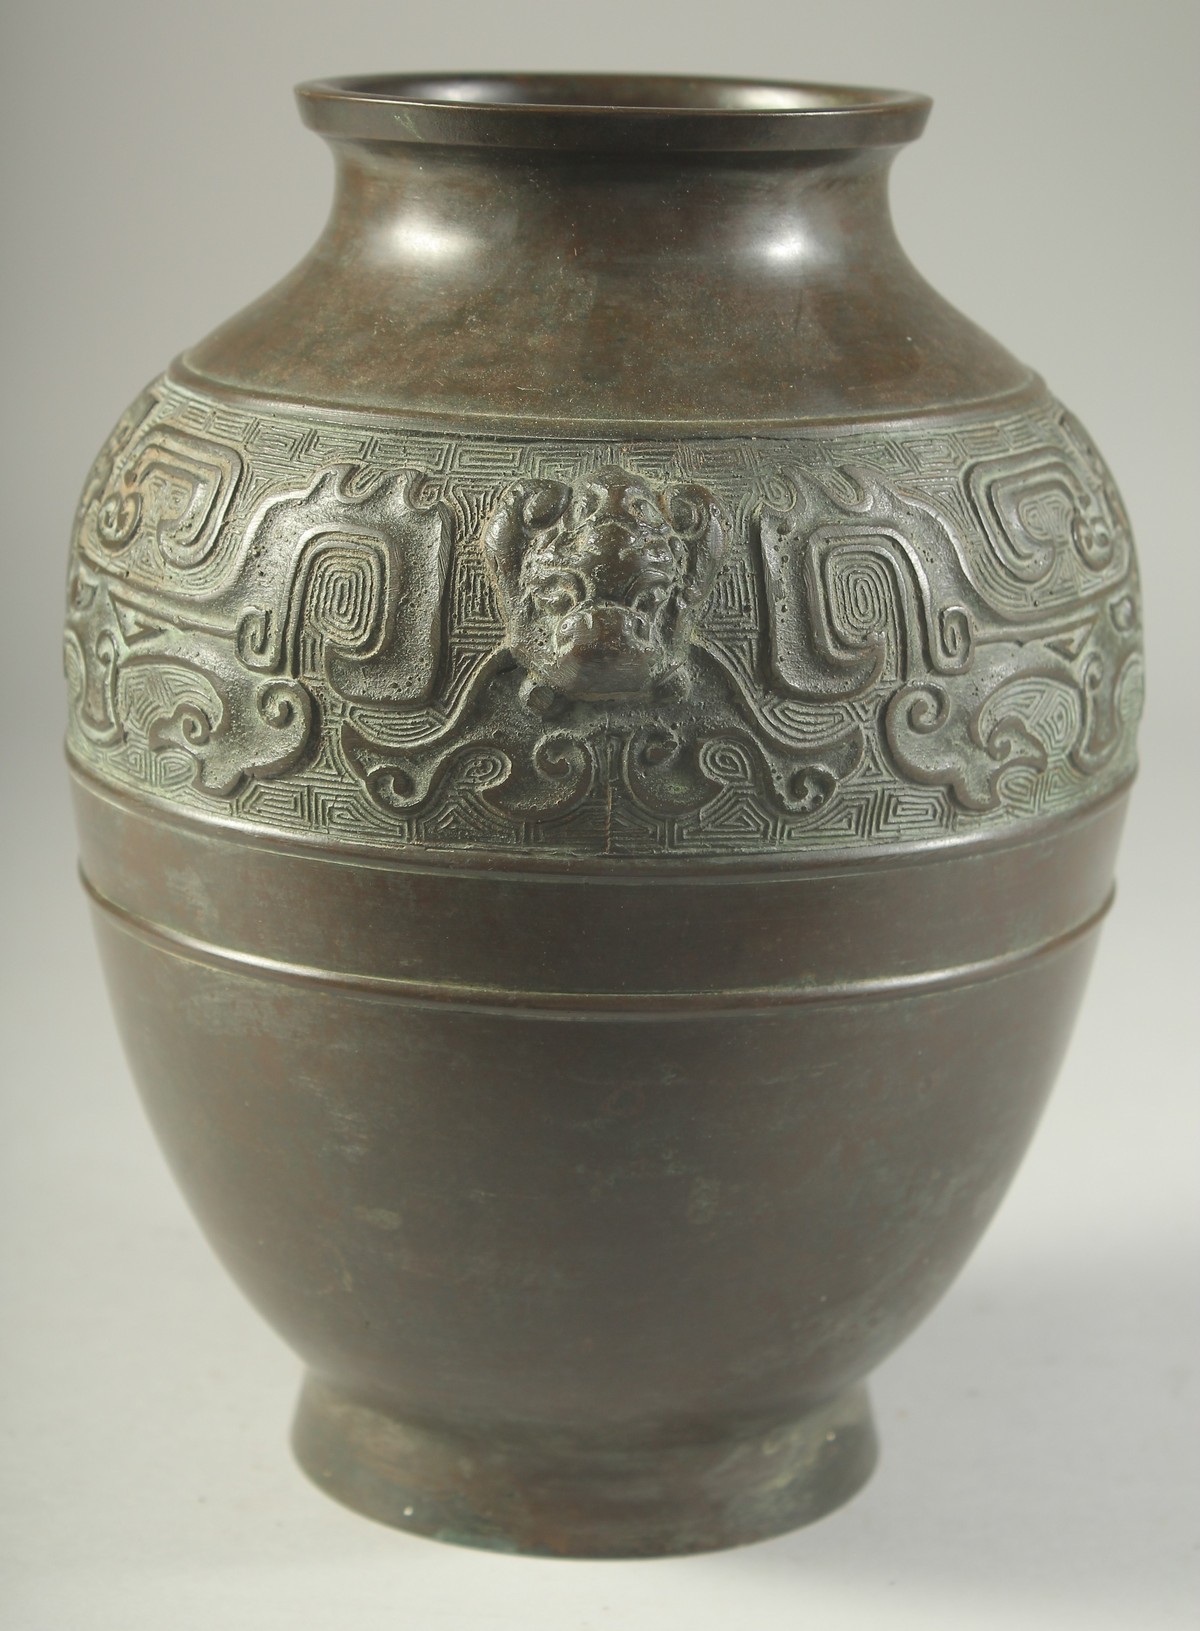 A CHINESE BRONZE VASE, with a band of archaic design and twin beast-head handles, 22cm high. - Image 4 of 6